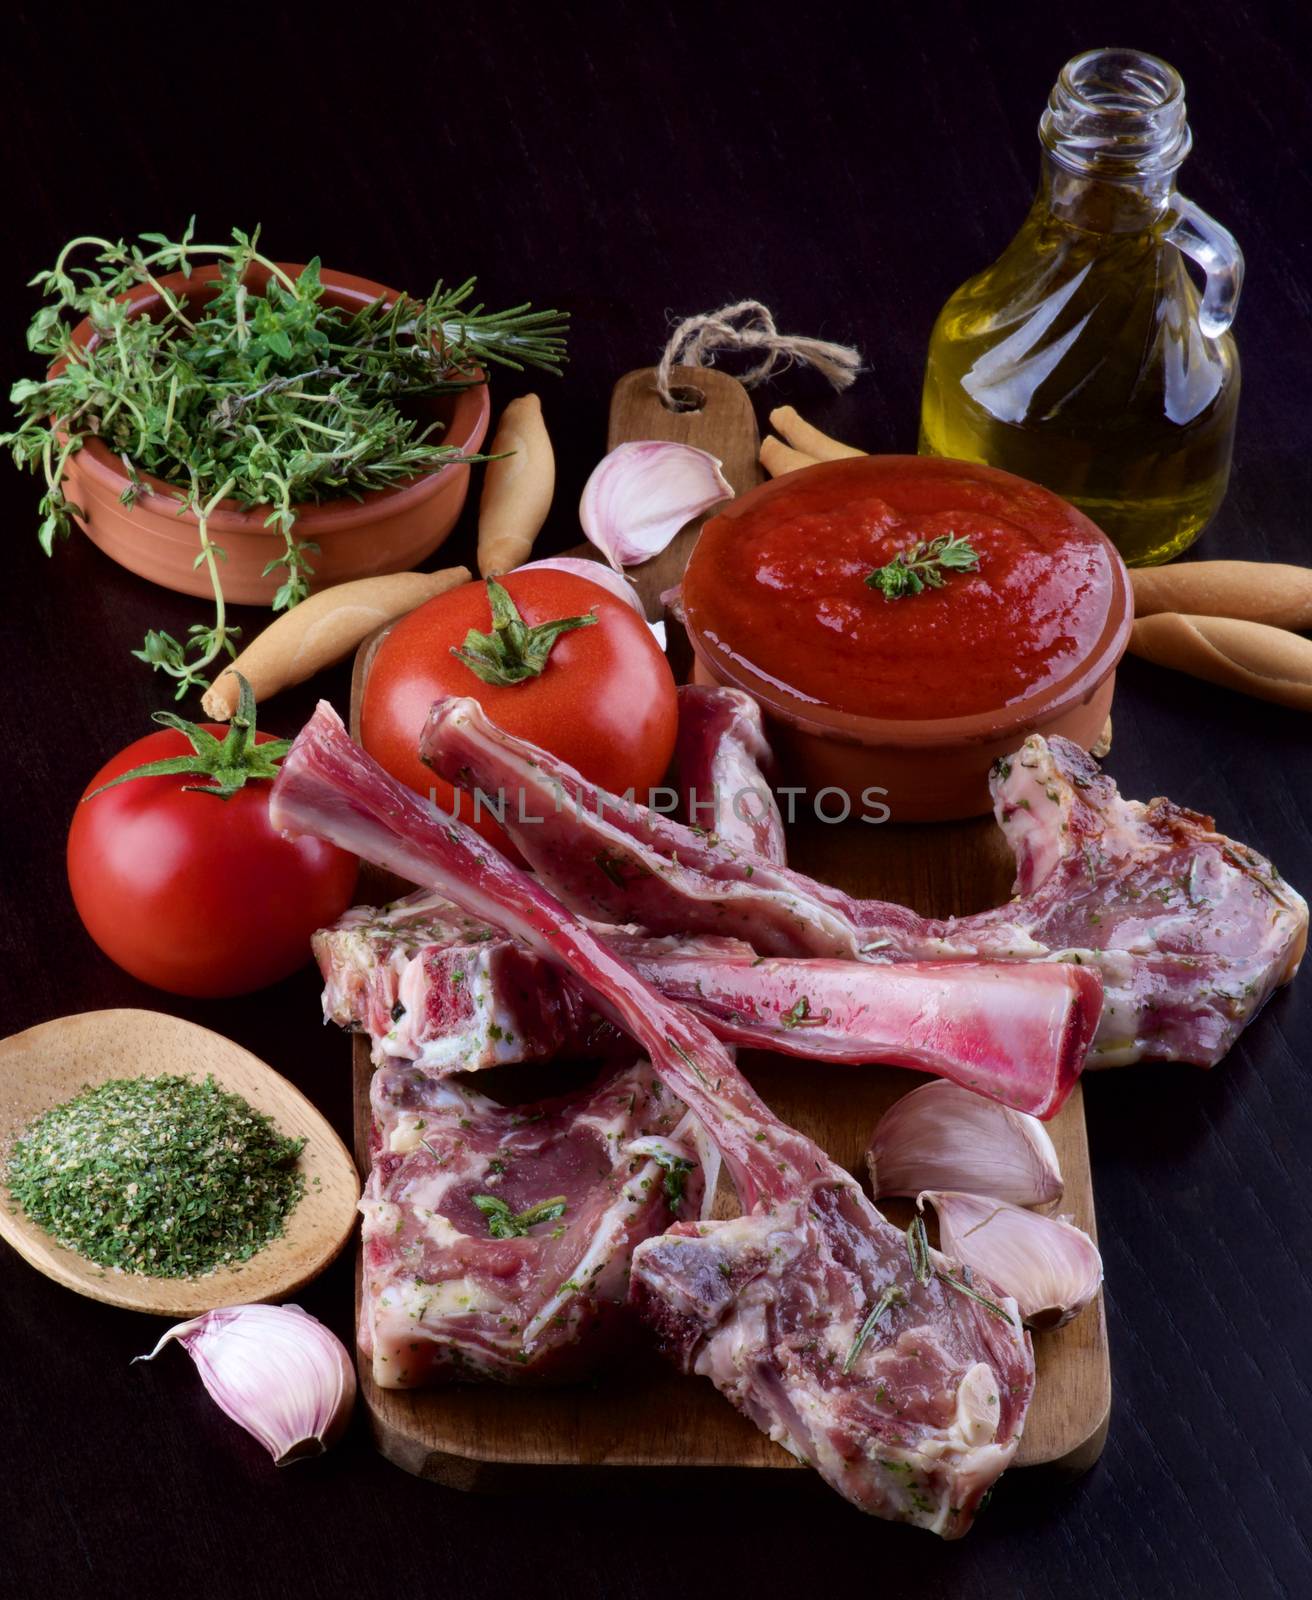 Ready to Roast Raw Lamb Ribs with Tomatoes, Sauce, Garlic, Herbs, Spices and Olive Oil on Wooden Cutting Board closeup on Dark Wooden background